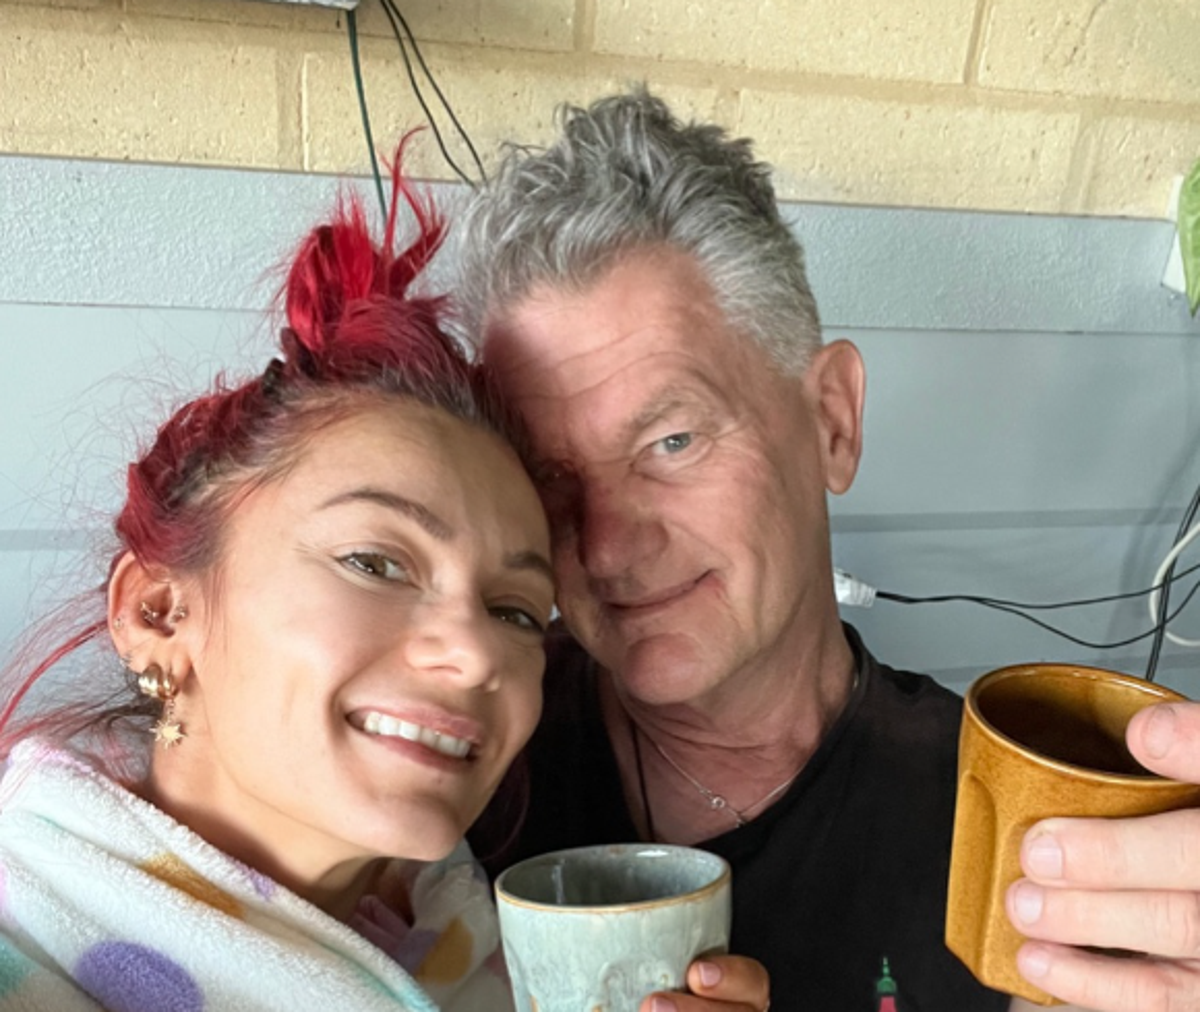 Dianne Buswell has revealed her dad Mark (pictured with her) has completed his chemotherapy treatment (Dianne Buswell/Instagram)